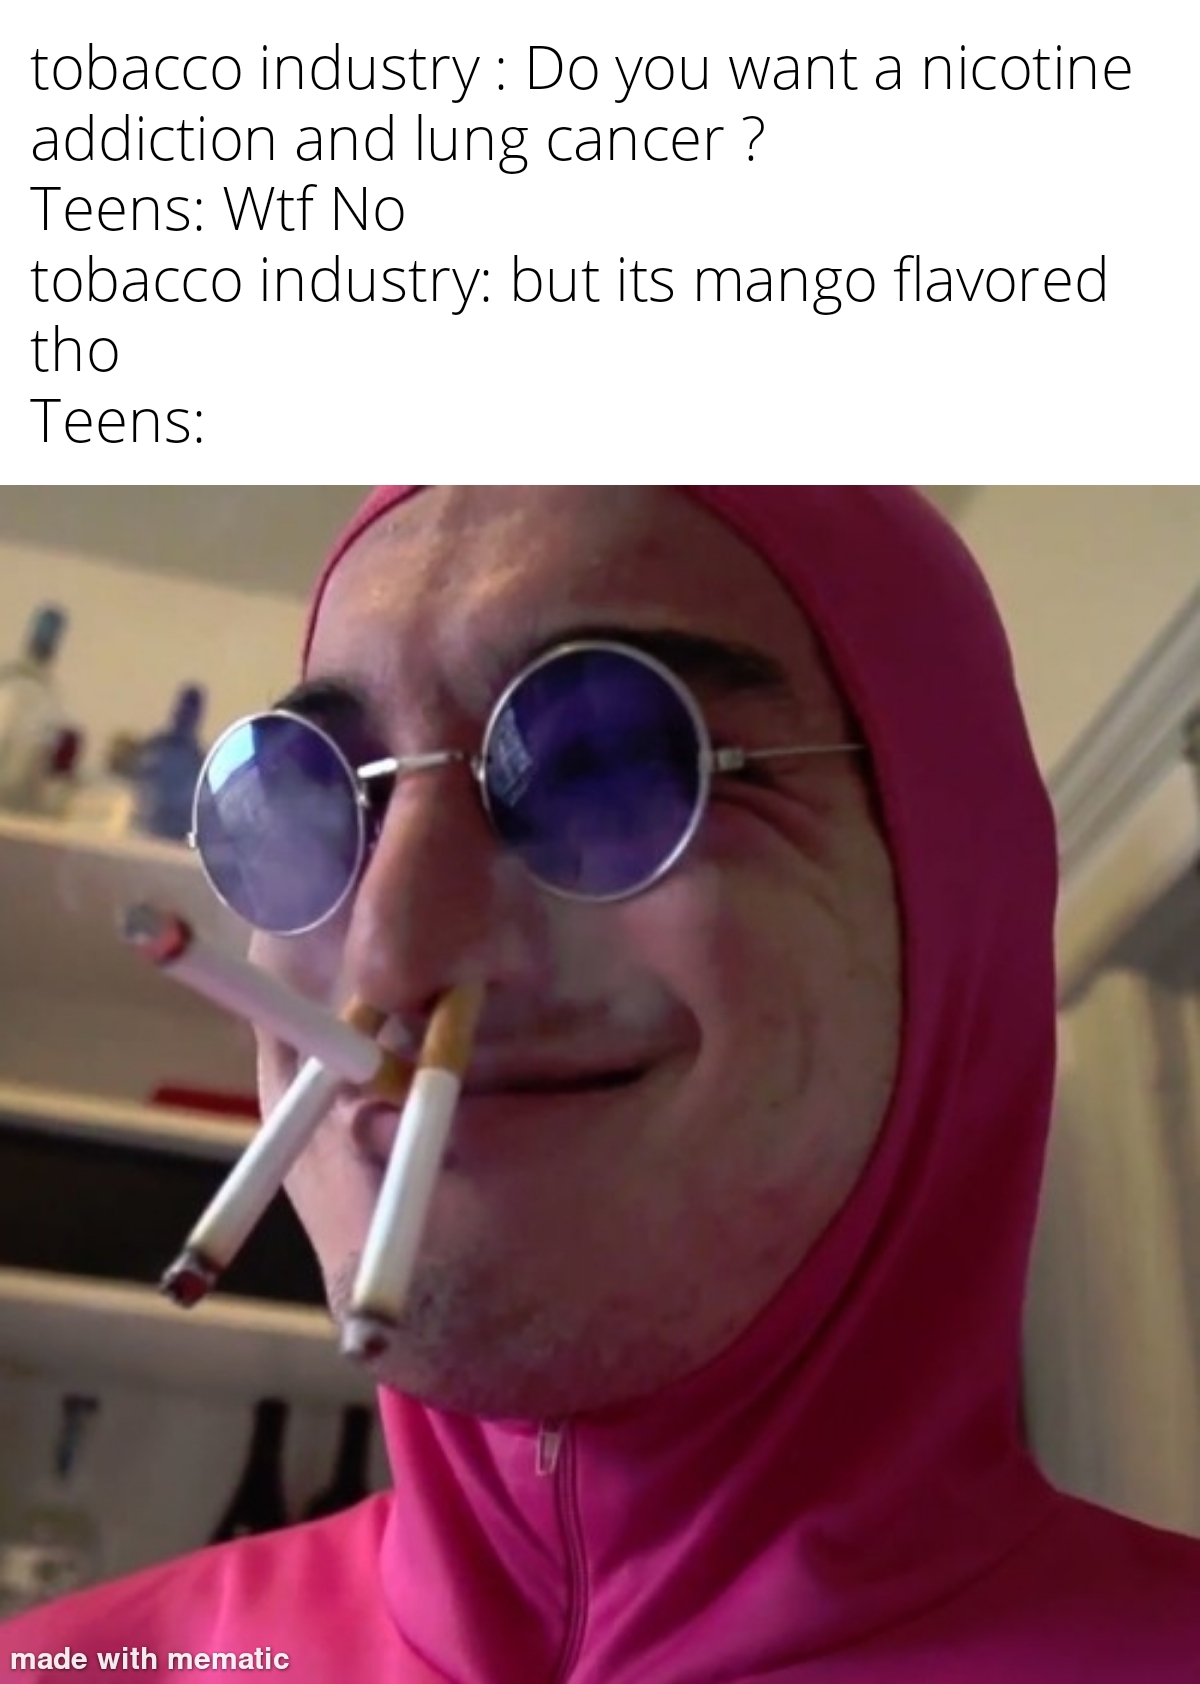 its filthy frank - tobacco industry Do you want a nicotine addiction and lung cancer? Teens Wtf No tobacco industry but its mango flavored tho Teens made with mematic